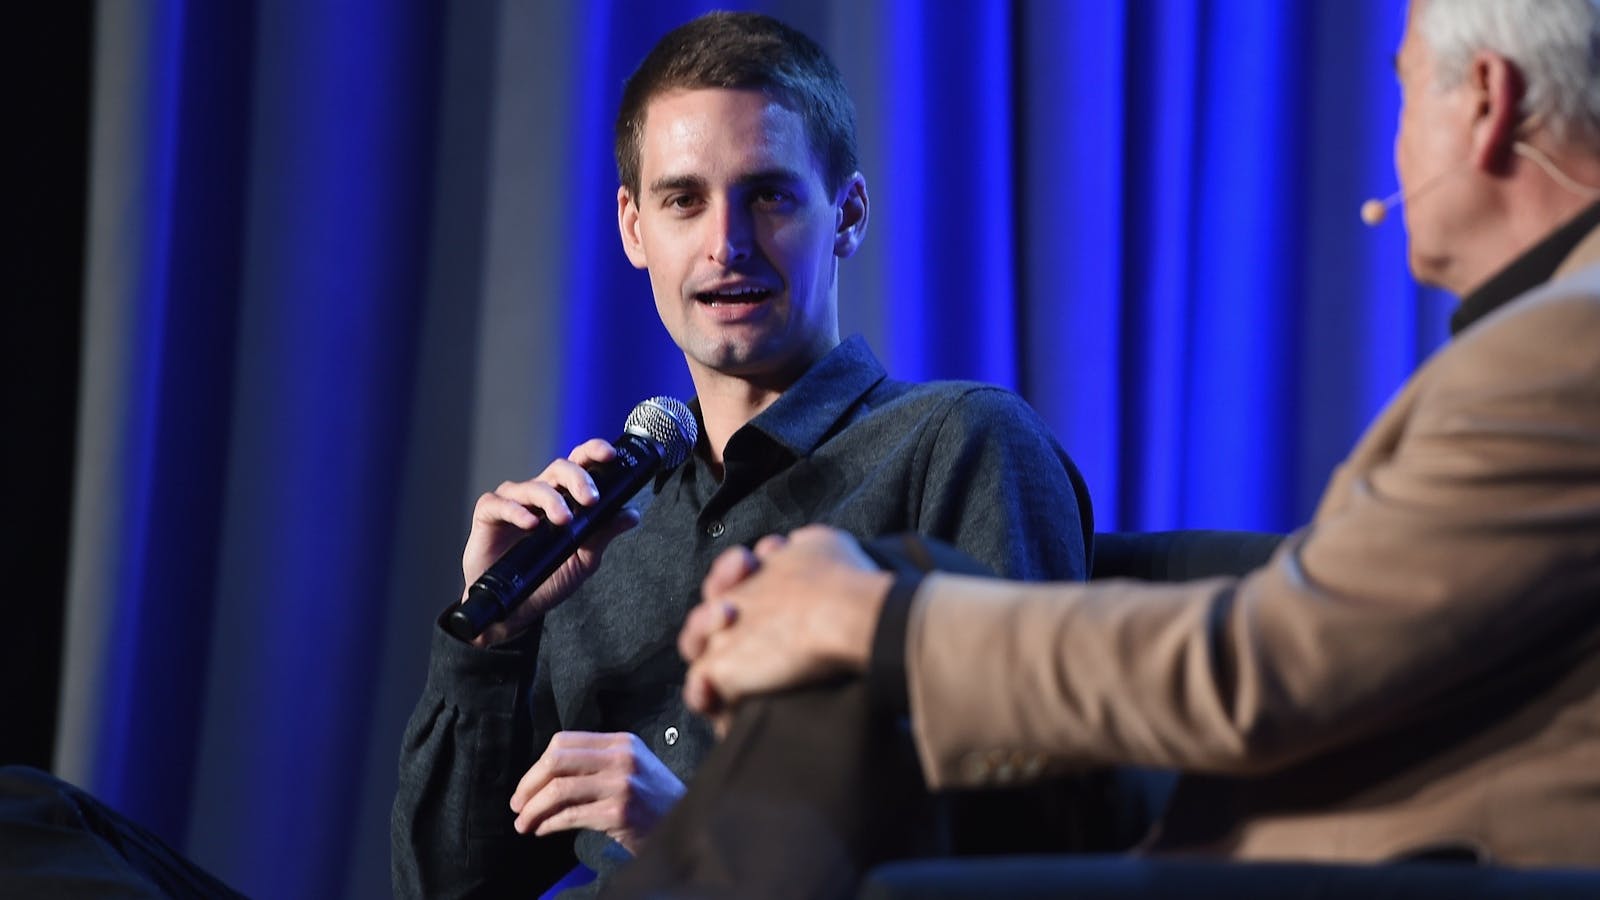 Snapchat CEO Evan Spiegel. Photo by Larry Busacca/Getty Images.